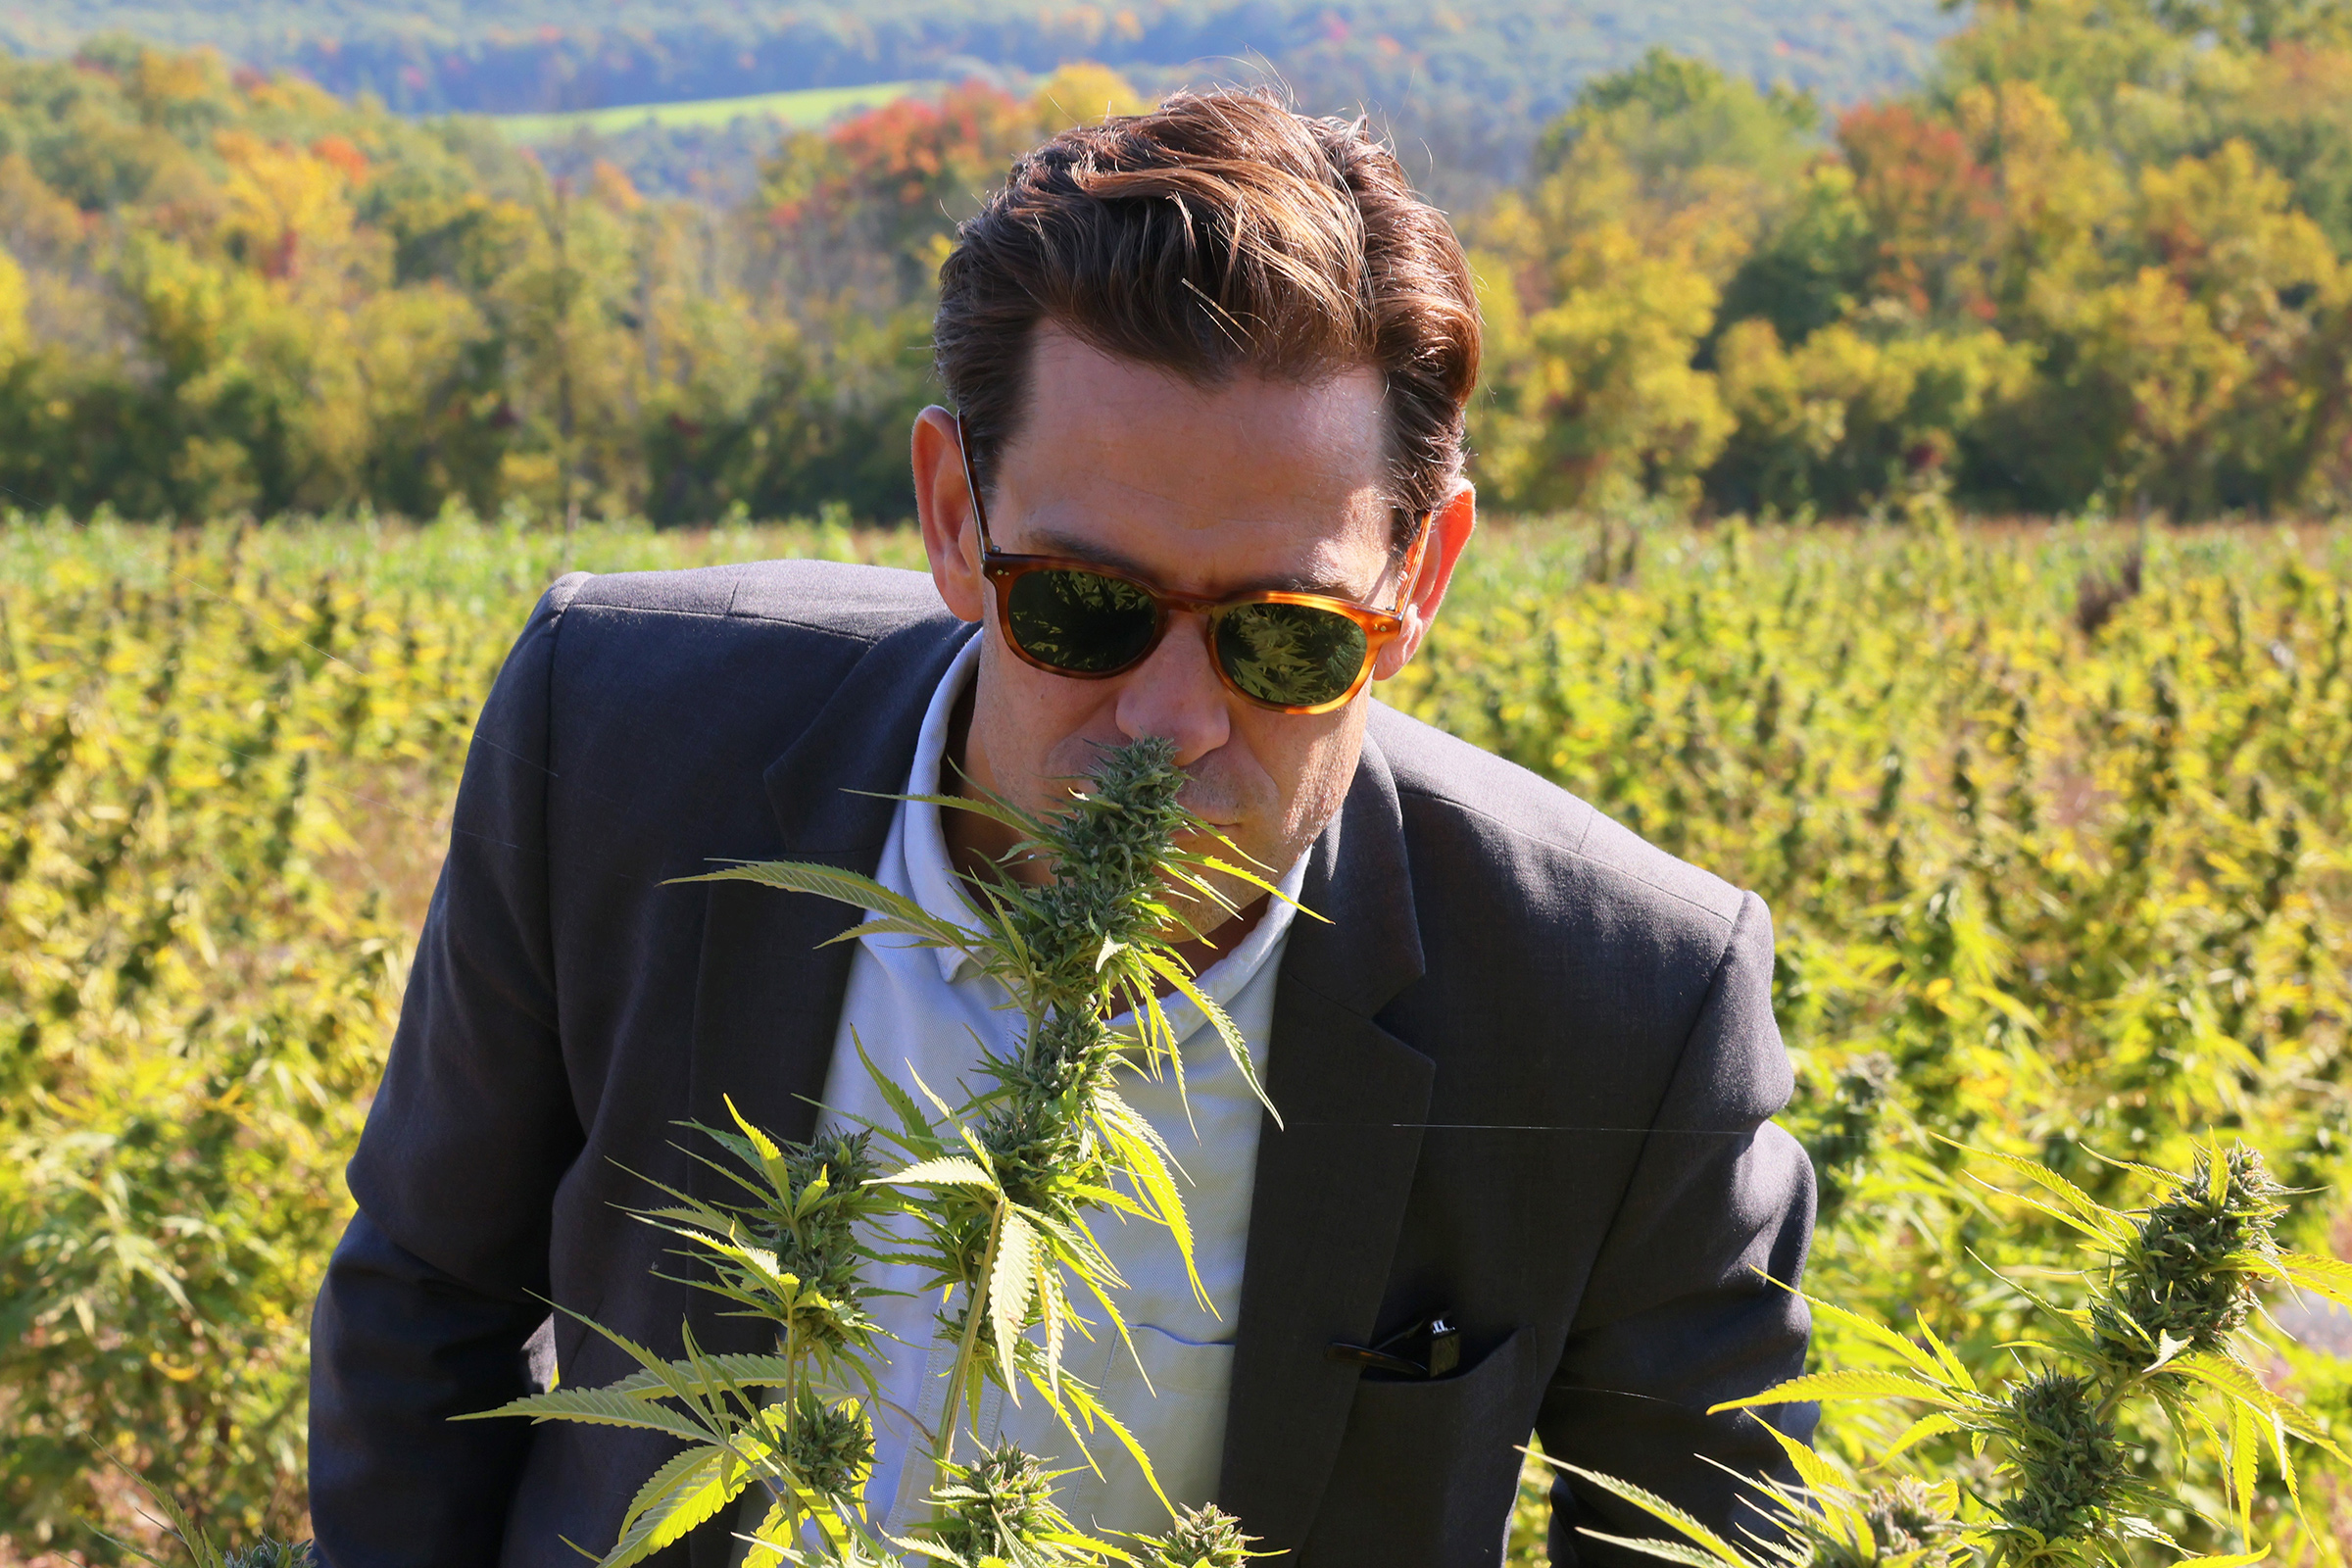 Axel Bernabe, Chief of Staff &amp; Senior Policy Director at NYS Office of Cannabis Management, smells a cannabis plant during a tour of Claudine Field Apothecary farm on Oct. 07 in Columbia County, New York. (Michael M. Santiago—Getty Images)